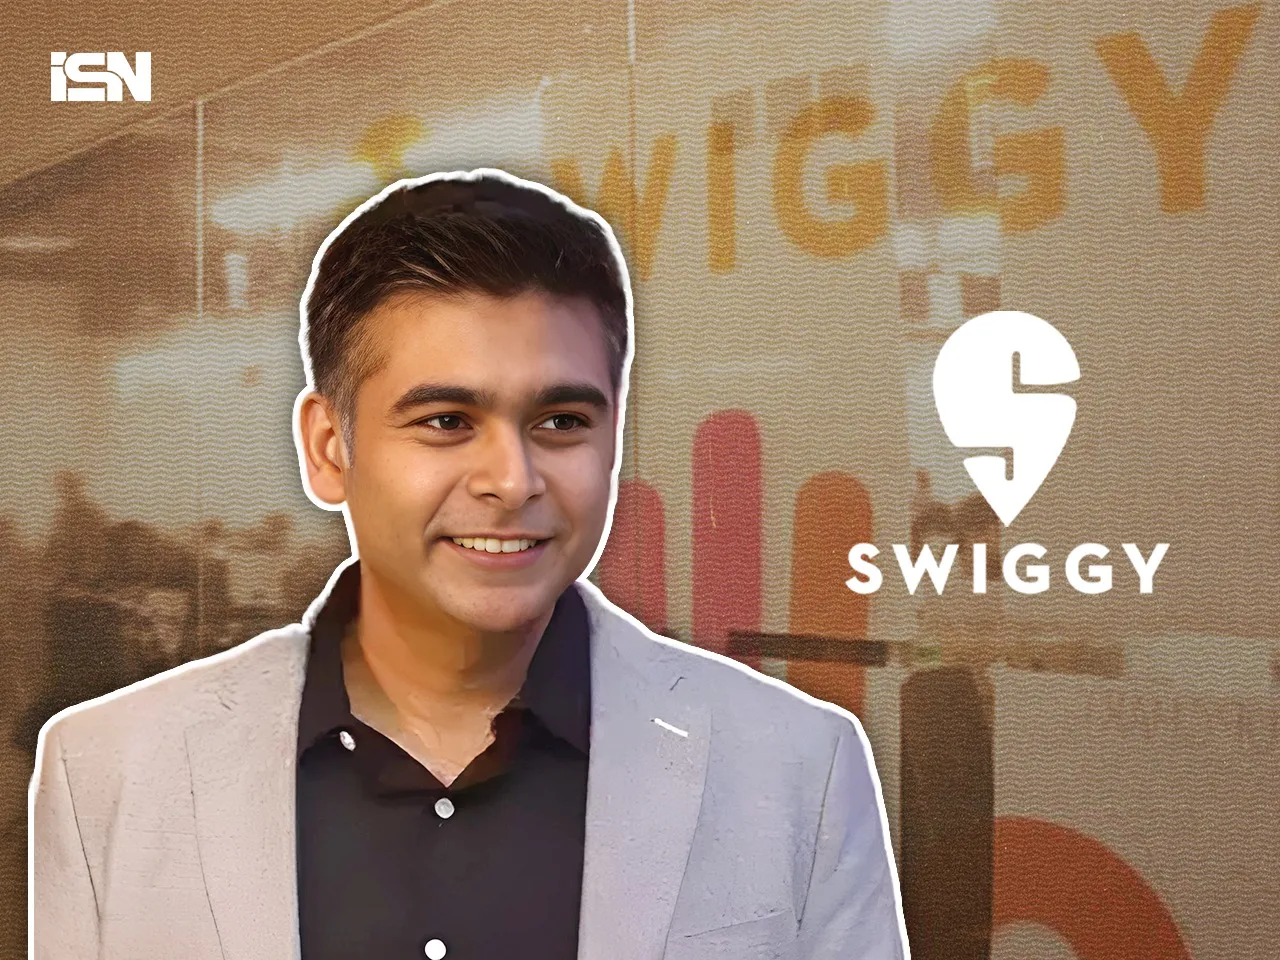 swiggy appointment